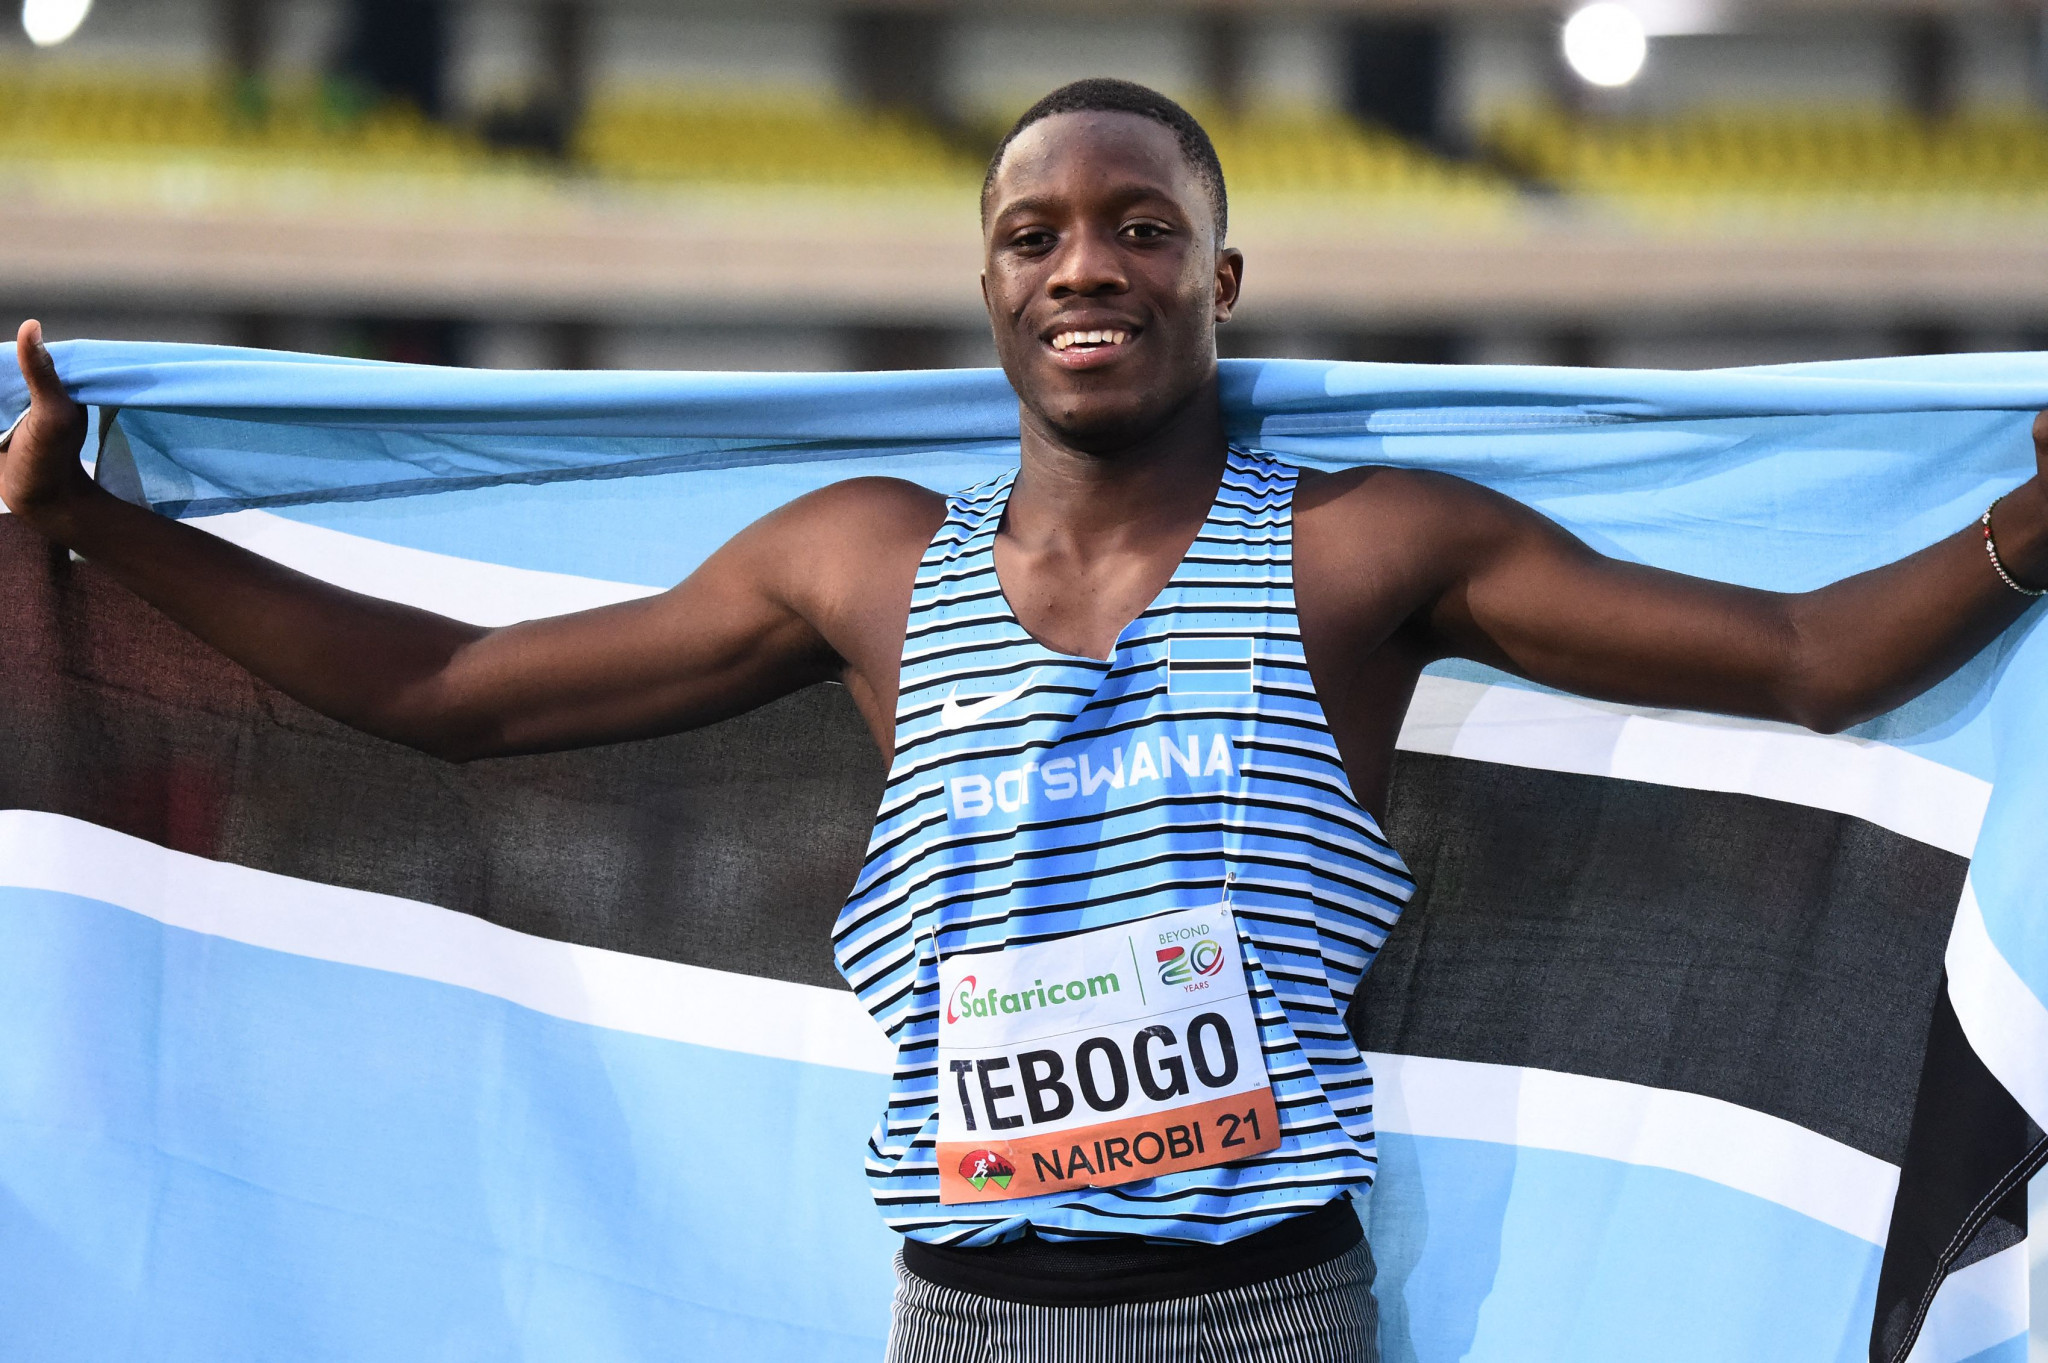 Tebogo leaves home fans on a high at Botswana Golden Grand Prix with super-fast 200m